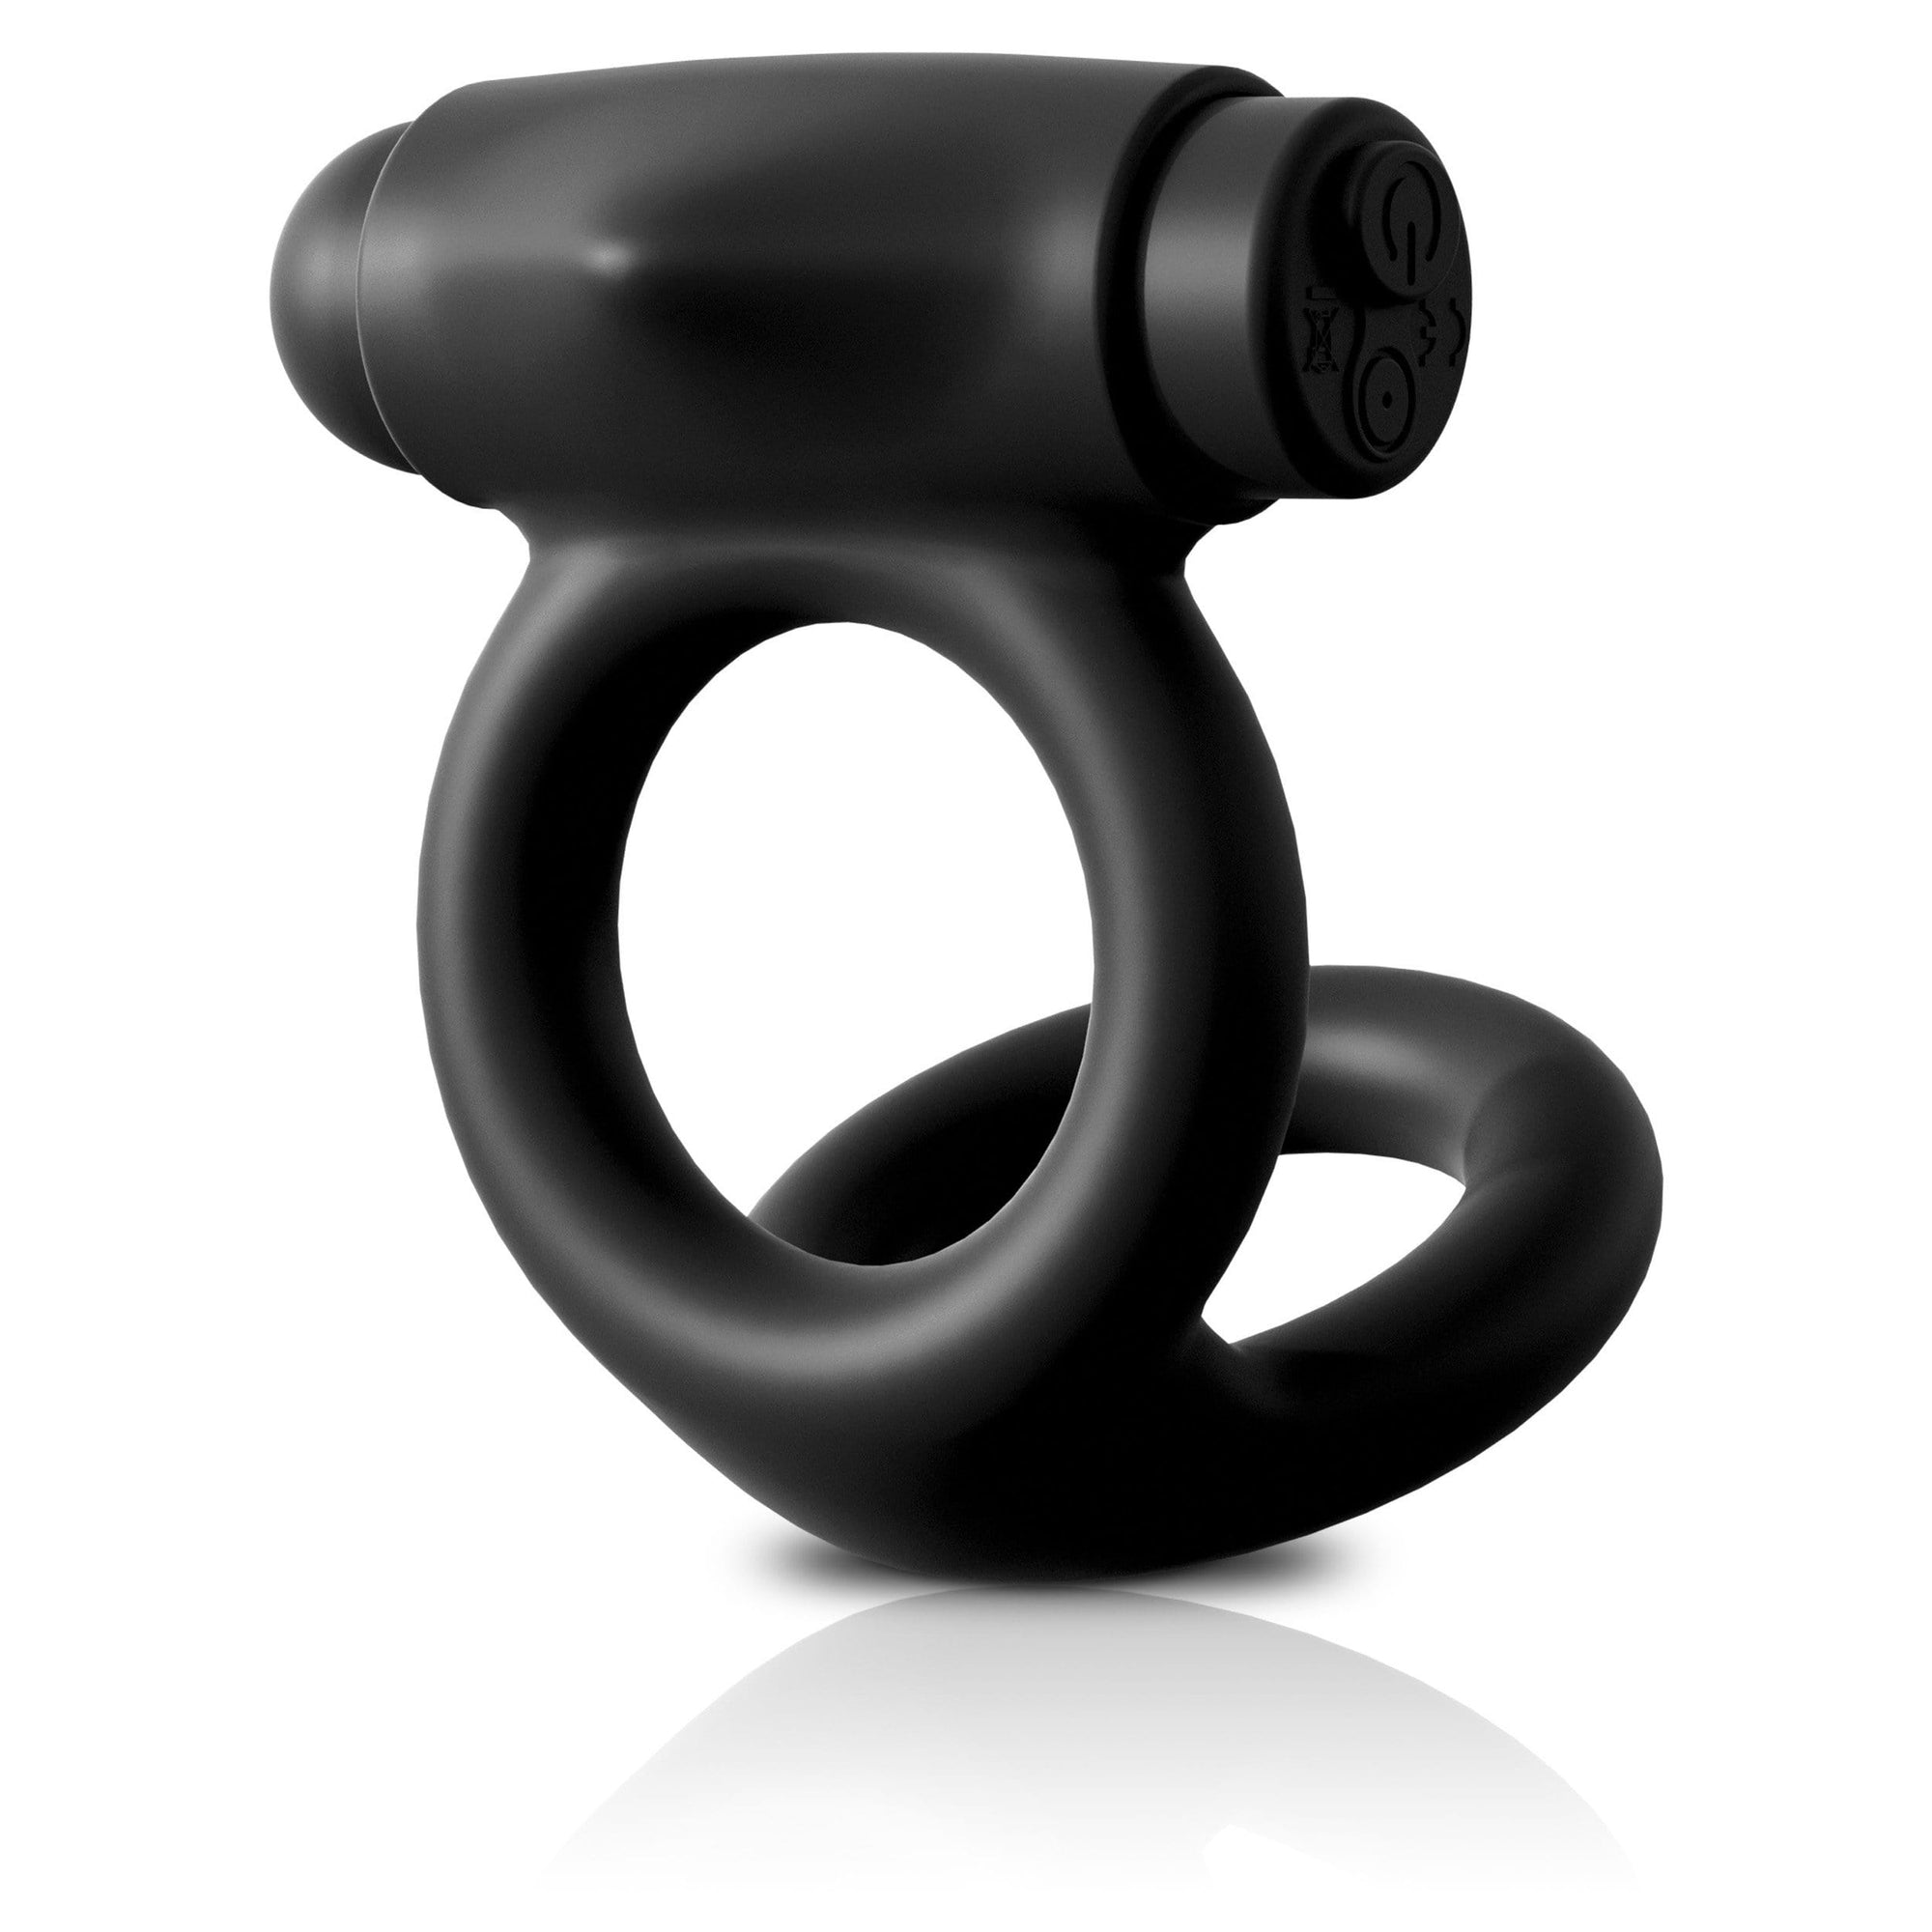 Sir Richards - Control Vibrating Silicone Cock and Ball C-Ring (Black) Silicone Cock Ring (Vibration) Rechargeable 324161458 CherryAffairs